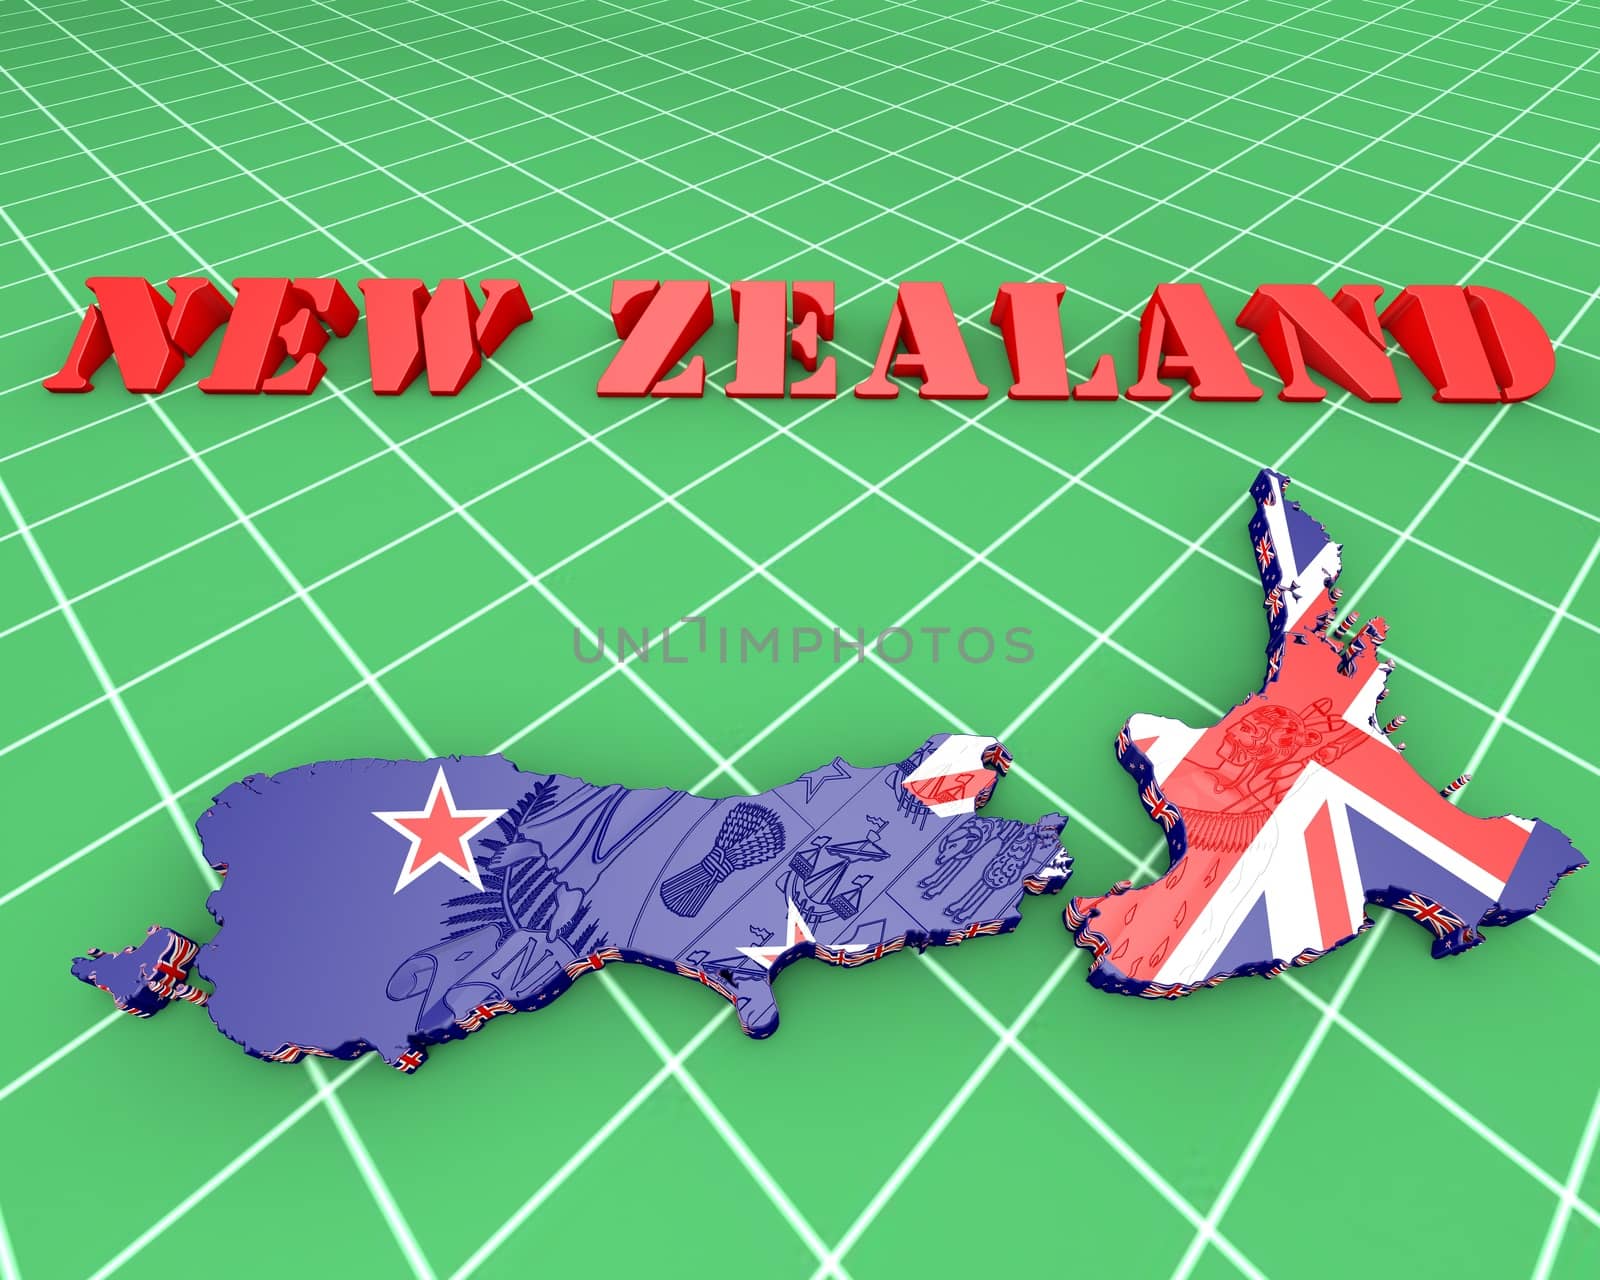 3D map illustration of New Zealand with coat of arms